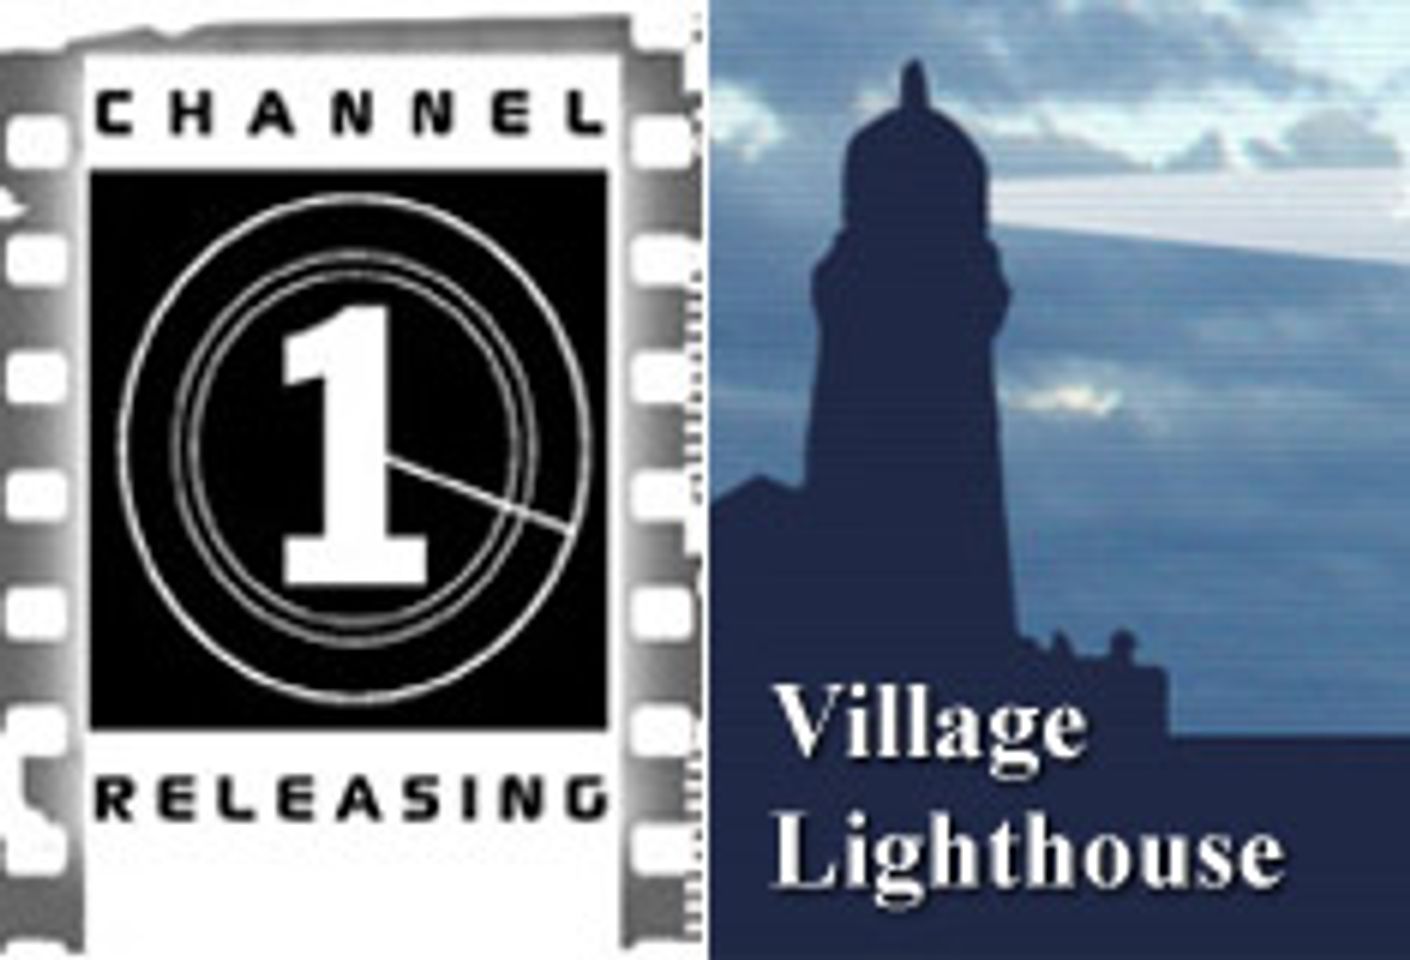 Village Lighthouse Partners With Channel 1 in Greeting Card and Magnet Deal